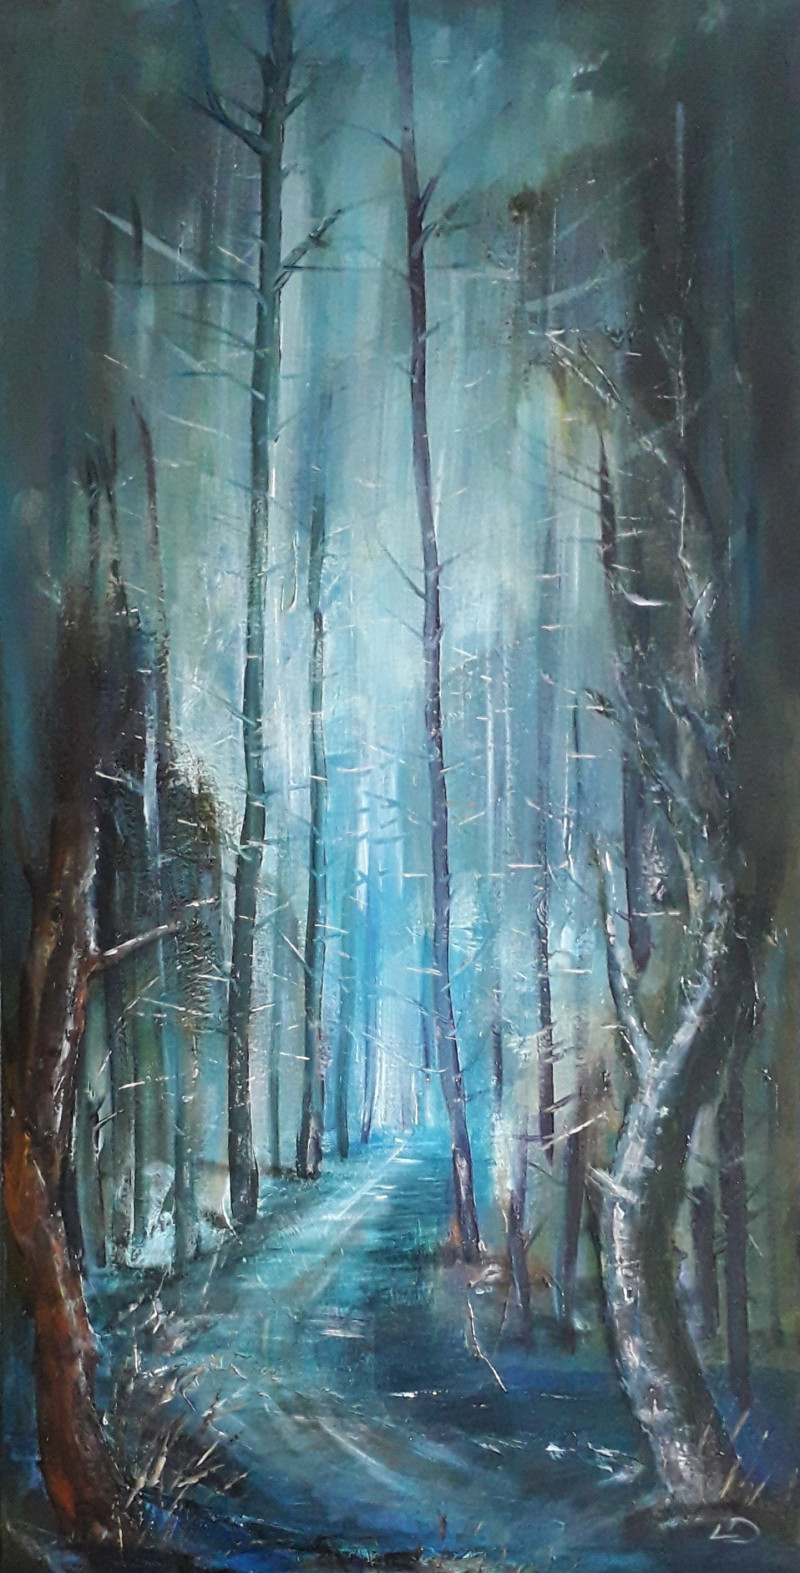 Winter in the Forest original painting by Lidija Dailidėnienė. Landscapes